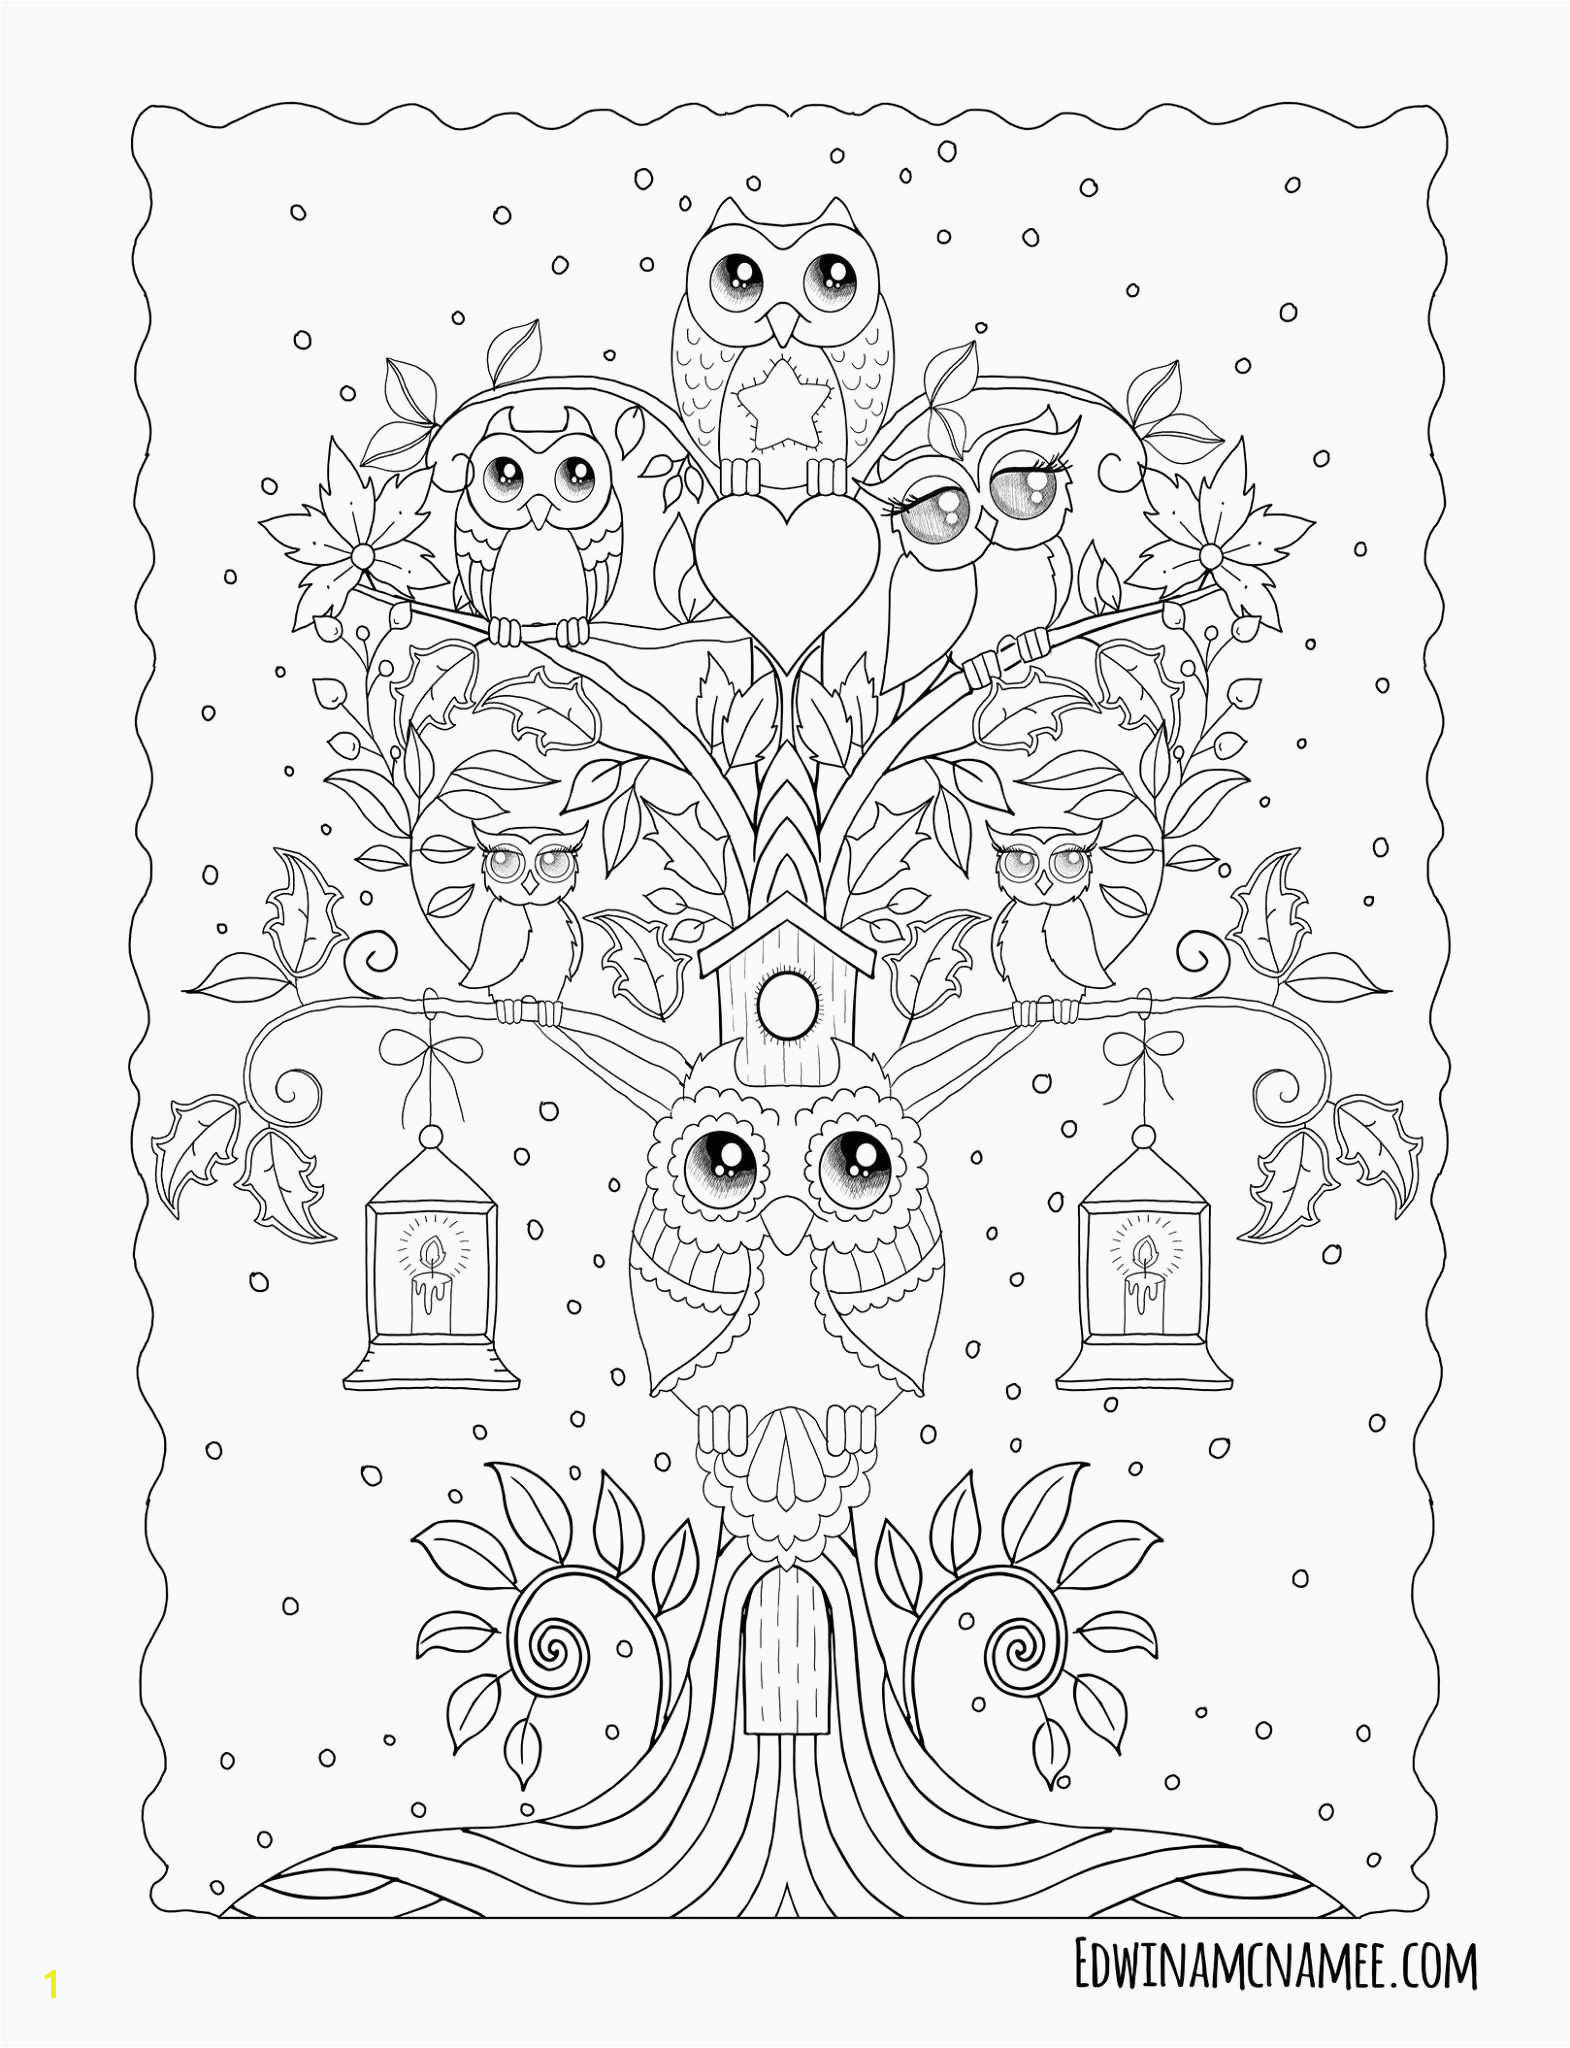 Paisley Coloring Pages Elegant Cool Abstract Doodle Zentangle Paisley Coloring Page for Adults Paisley Coloring